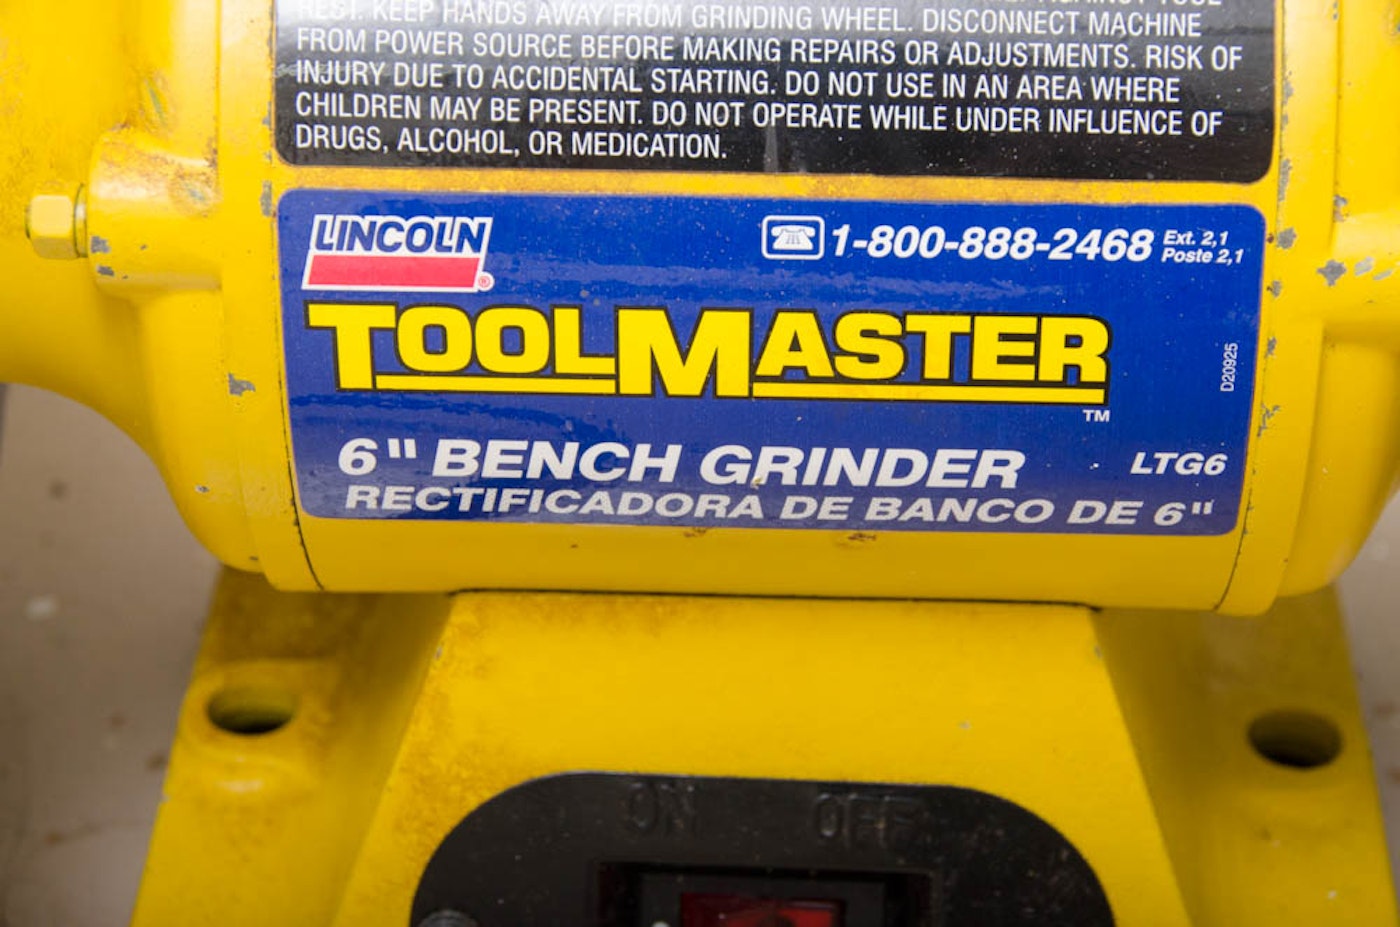 "ToolMaster" by Lincoln 6" Bench Grinder and Larin 5 